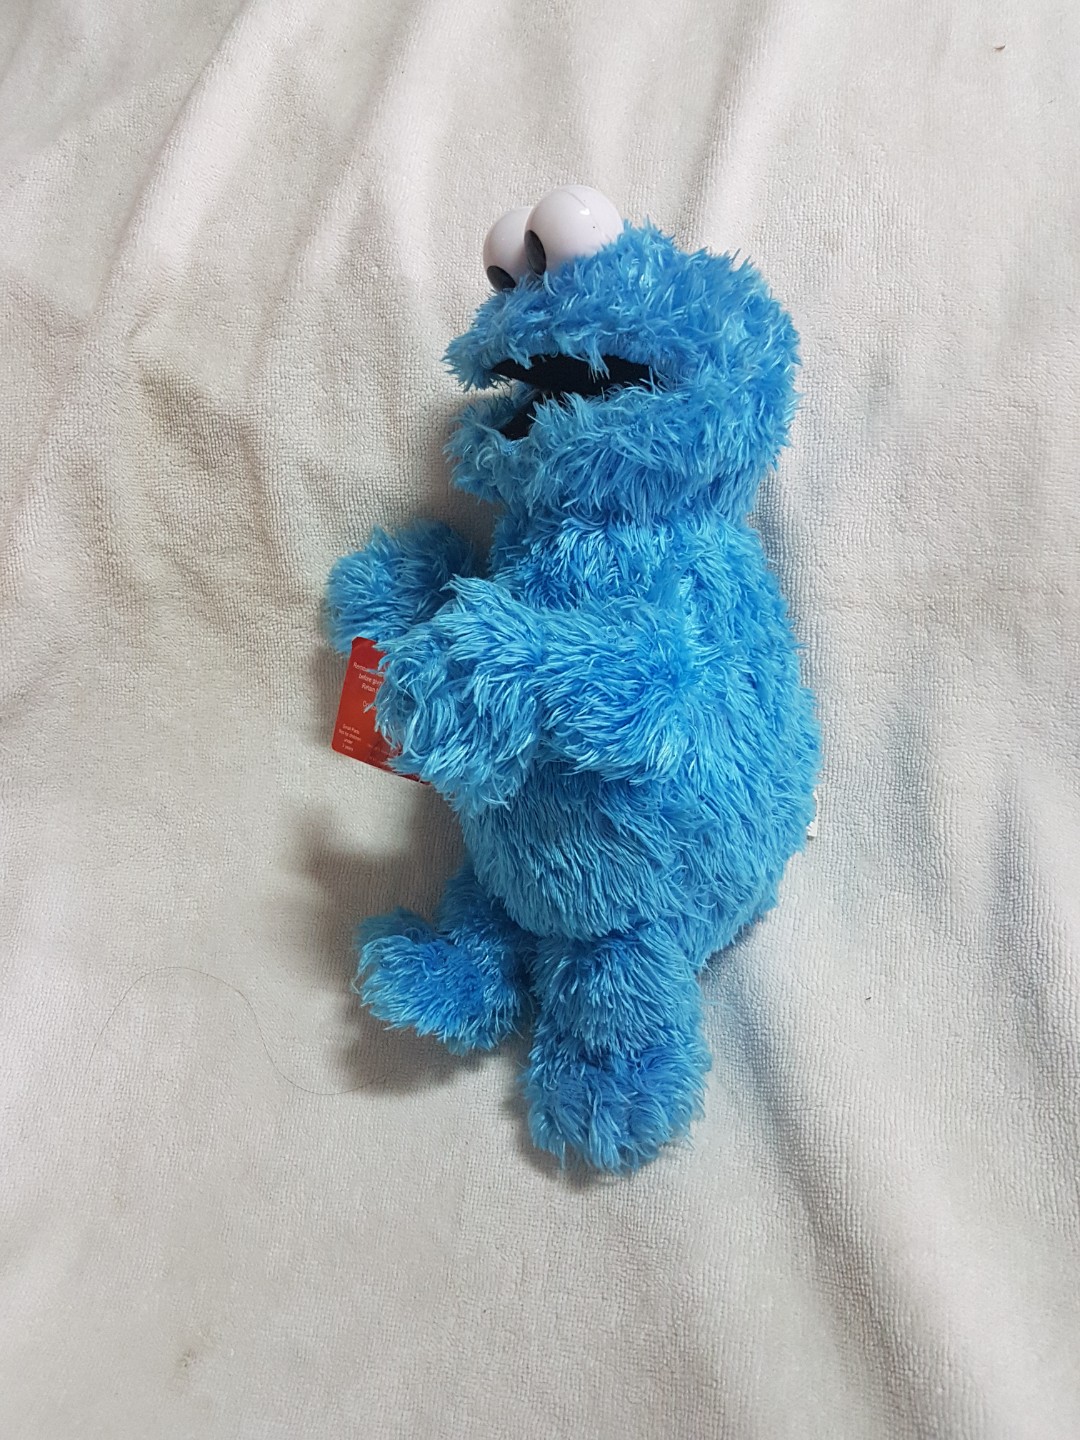 Authentic 12 inch Sesame Street Cookie Monster Plush Toy